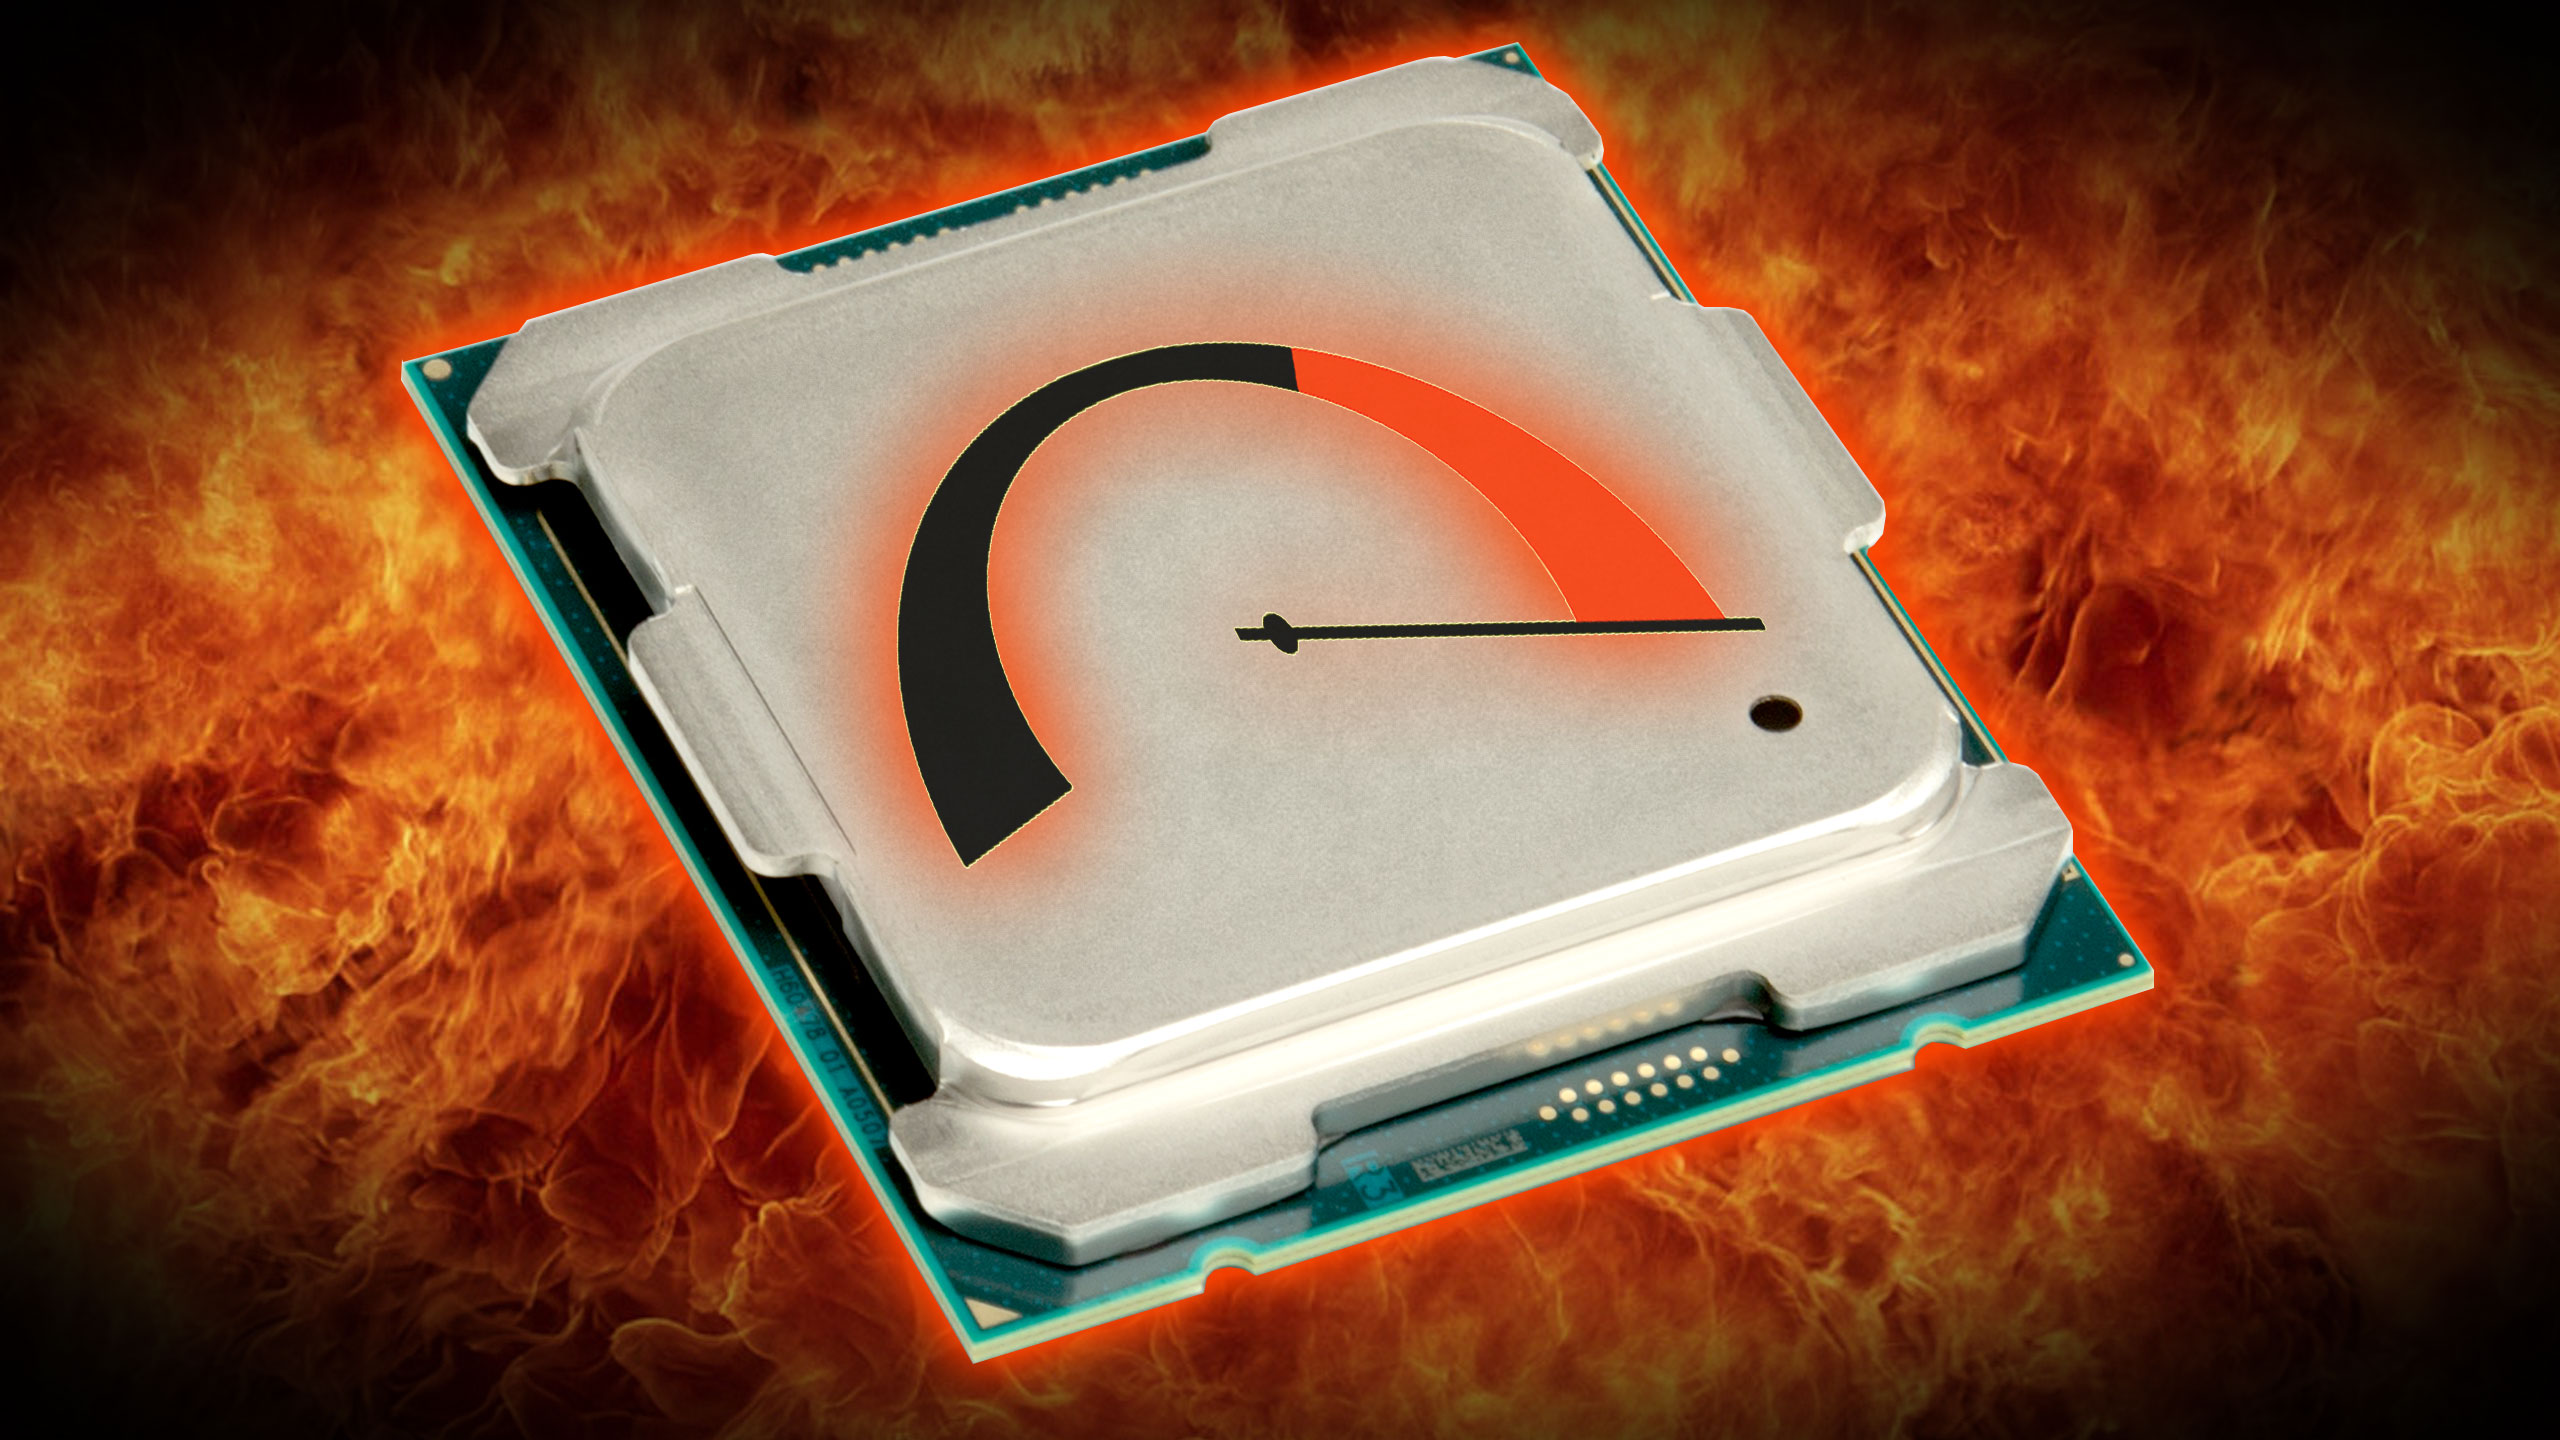 How hot will damage a CPU?